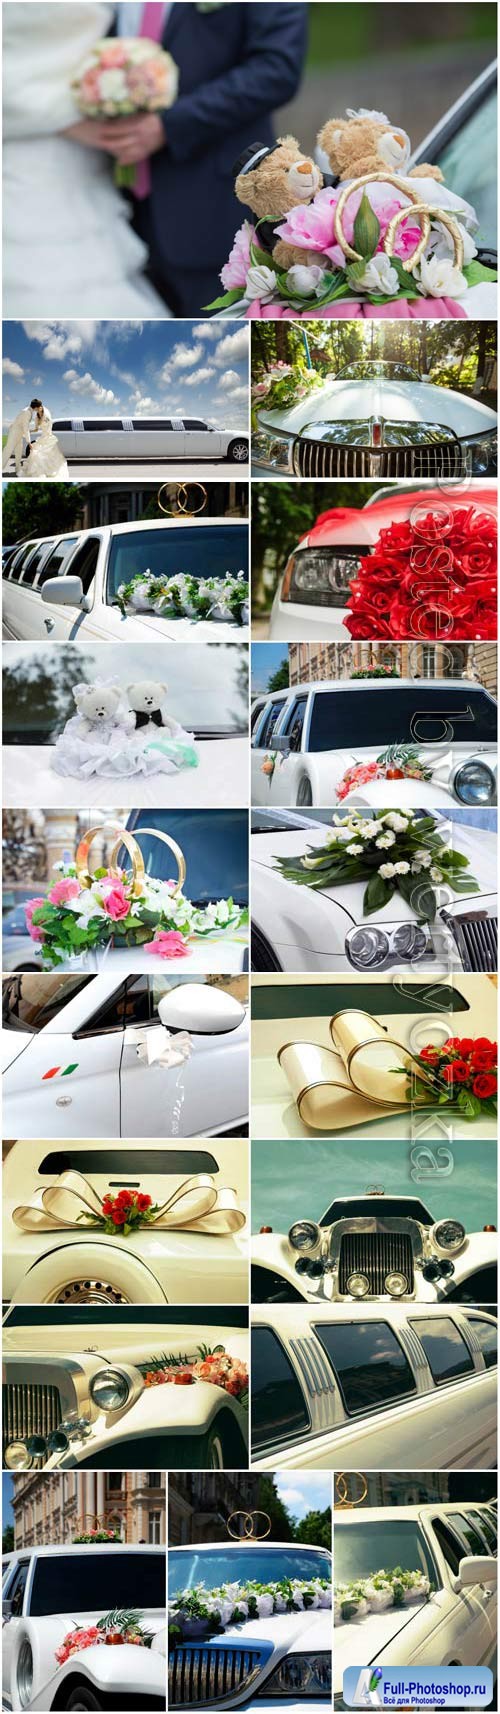 Decorated wedding cars, bride and groom stock photo